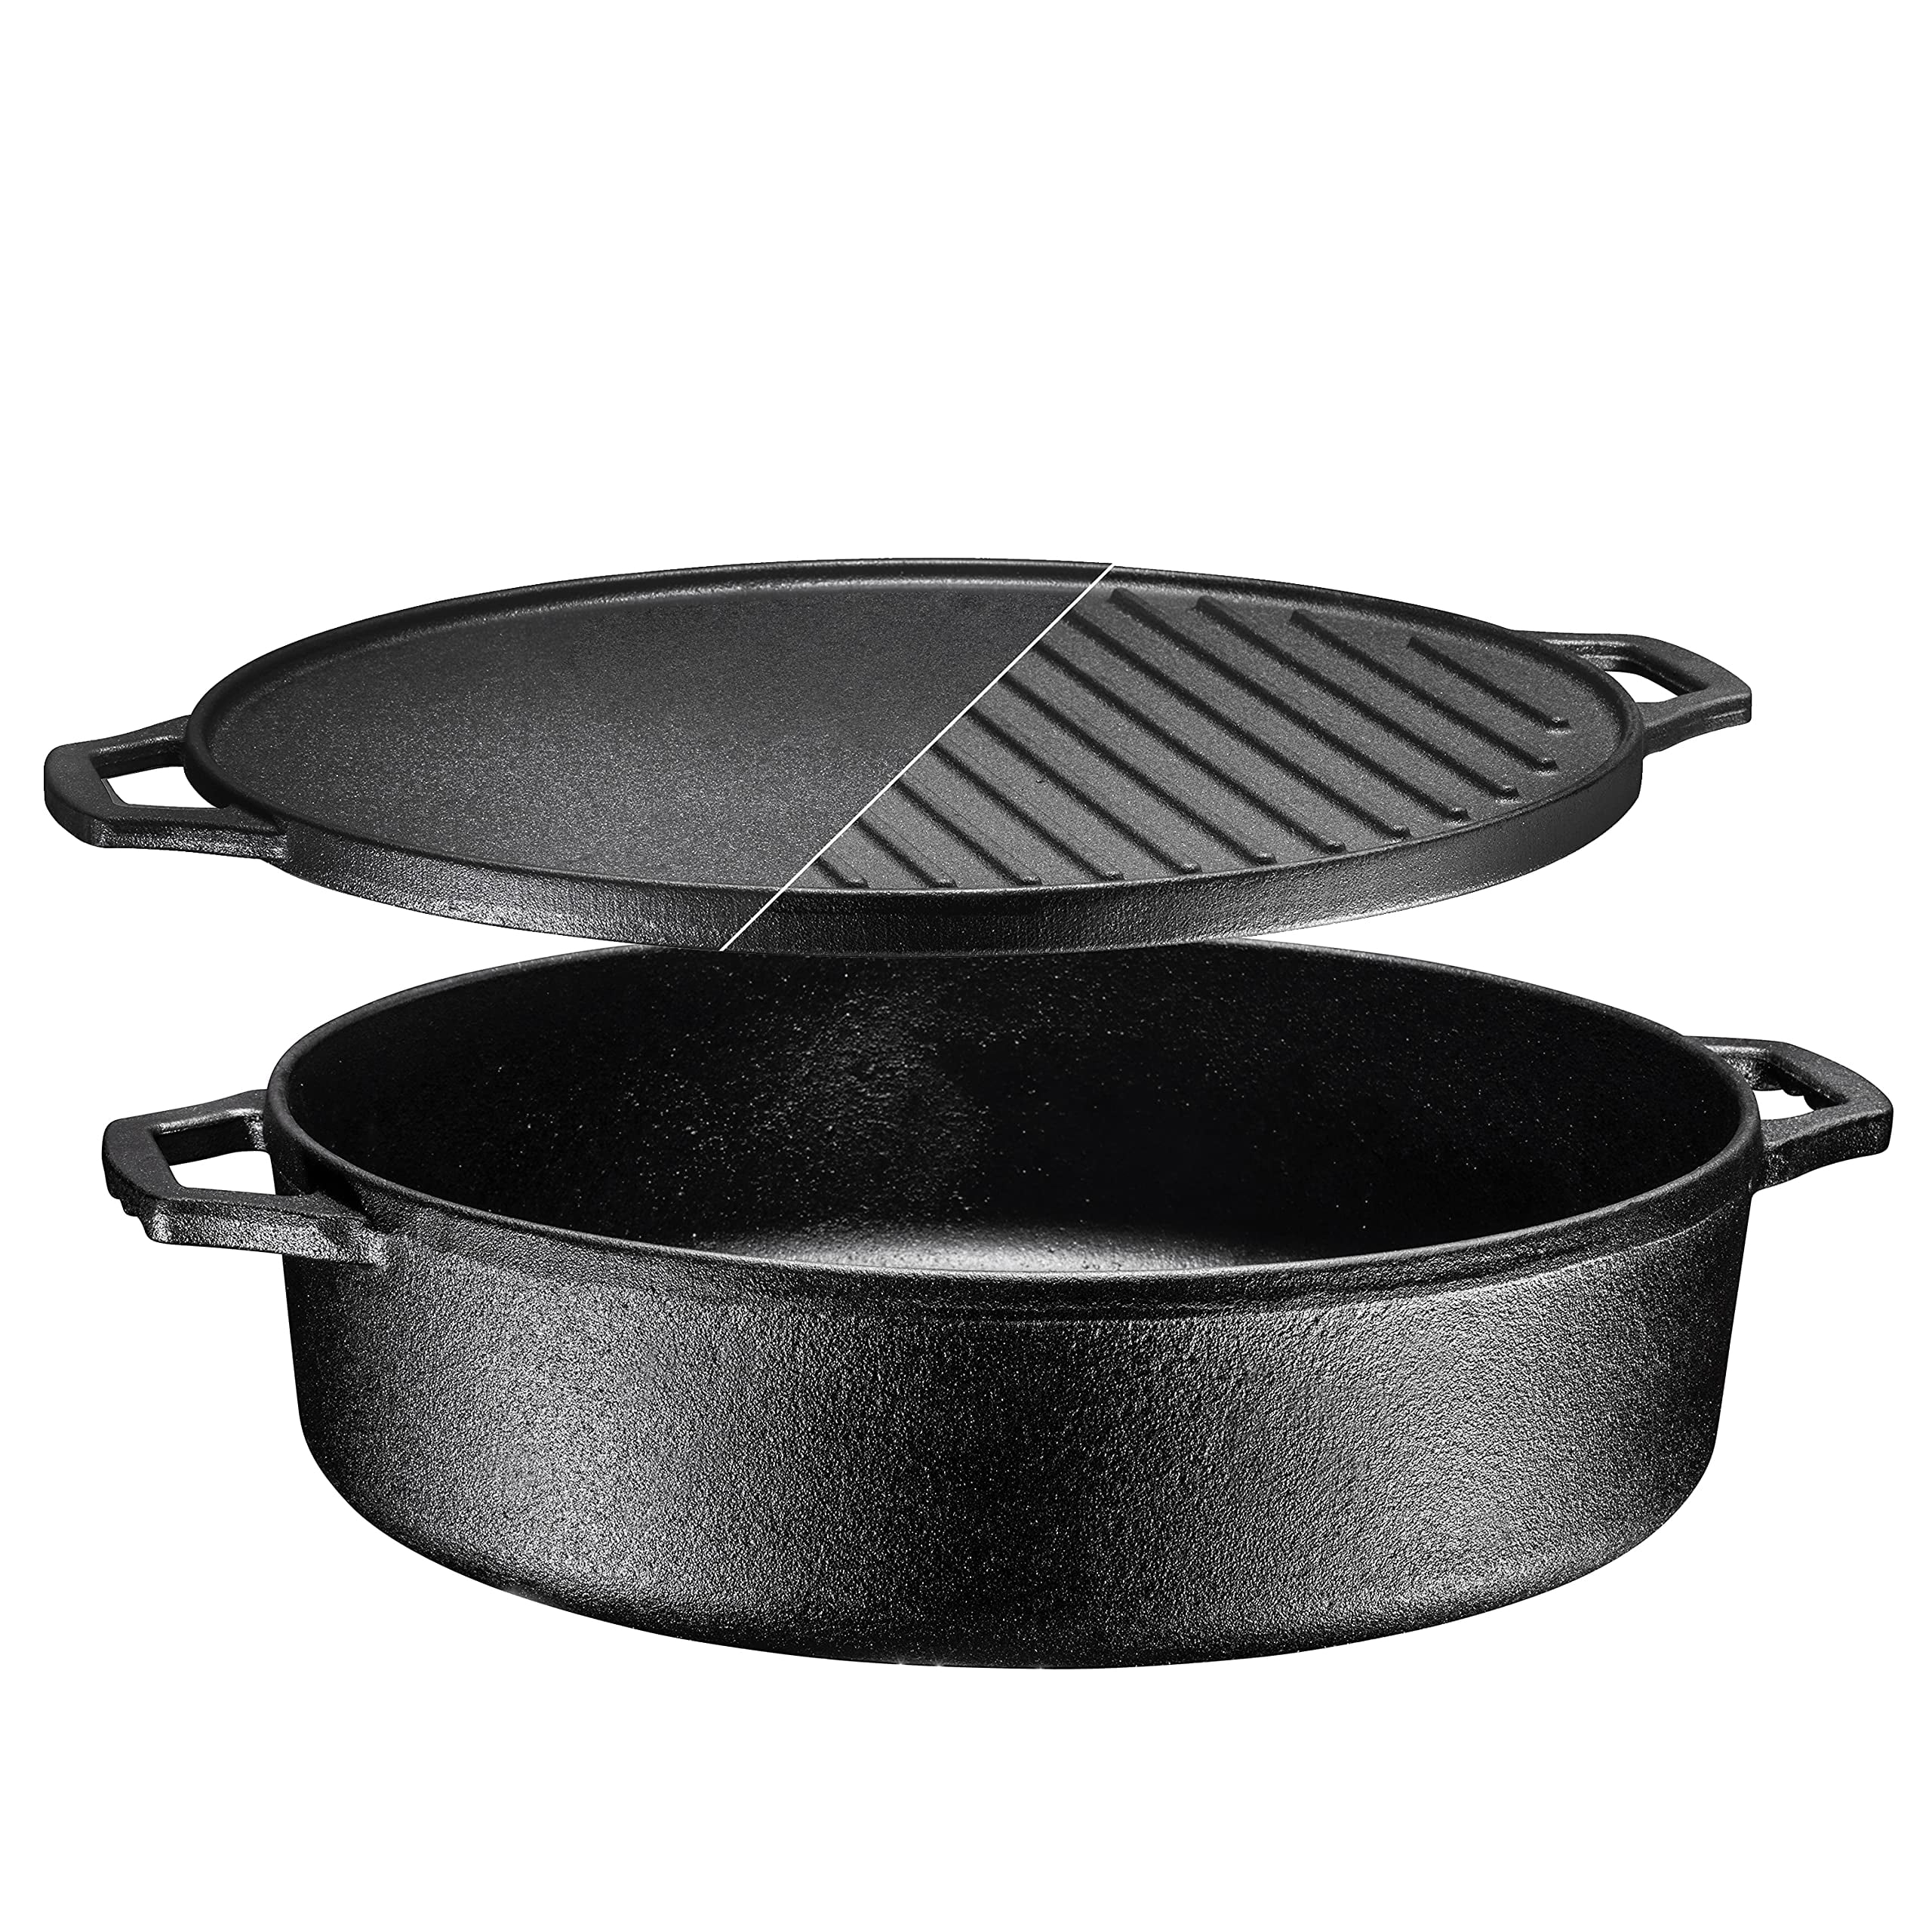 16-Inch x 12-Inch Nonstick Roaster with Reversible Rack